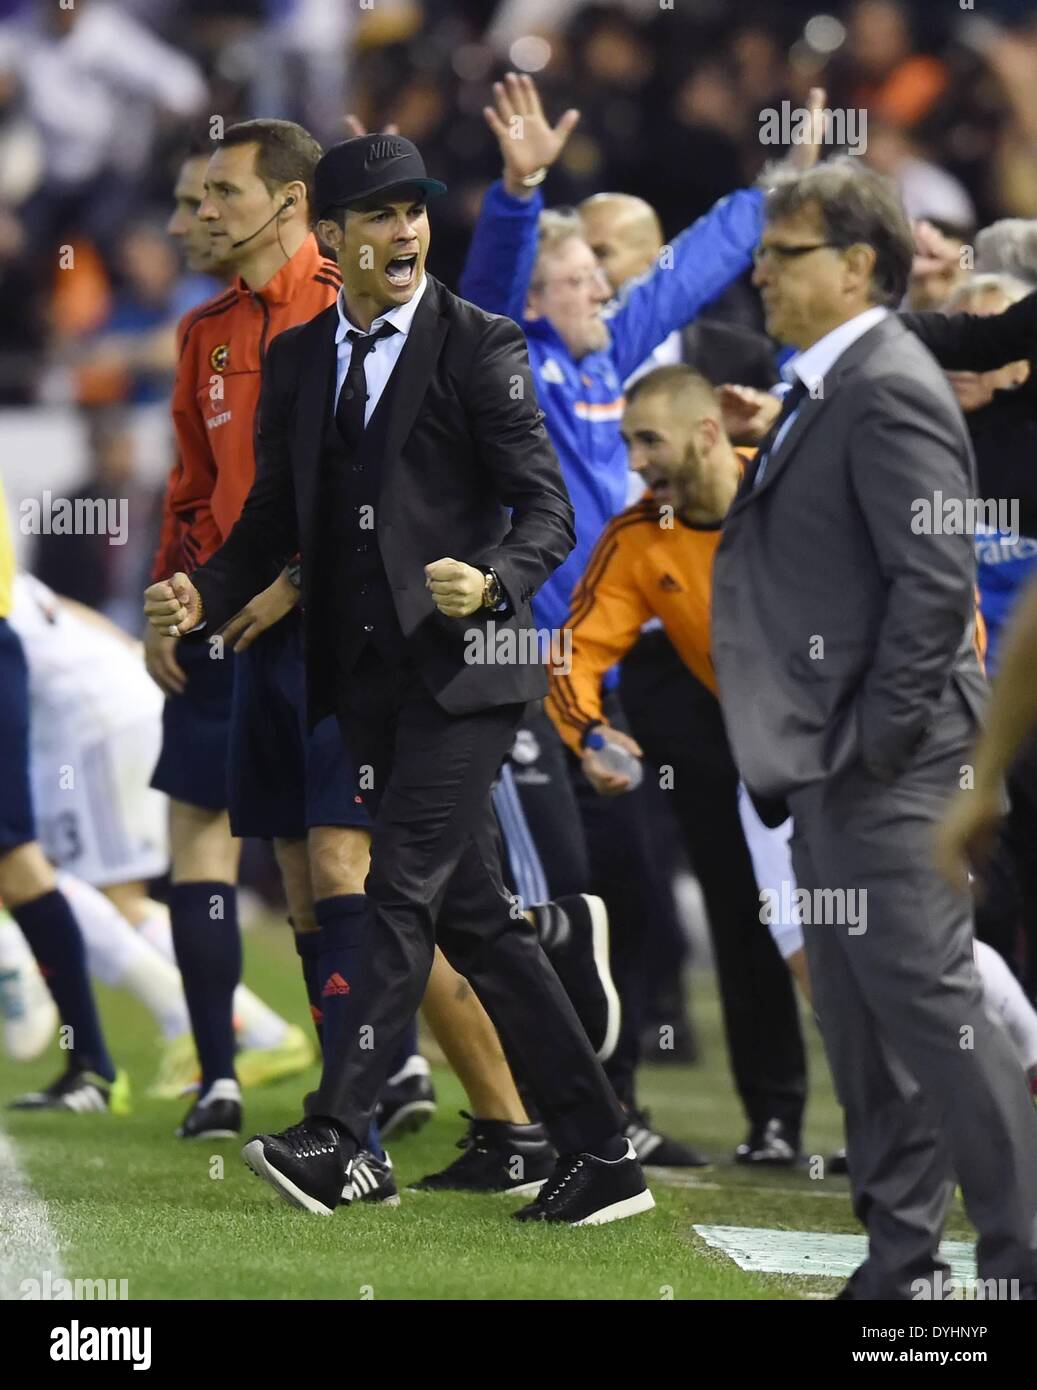 Mestalla, Valencia, Spain. 16th Apr, 2014. Copa Del Rey Cup final. Barcelona versus Real Madrid. Cristiano Ronaldo at the final whistle © Action Plus Sports/Alamy Live News Stock Photo